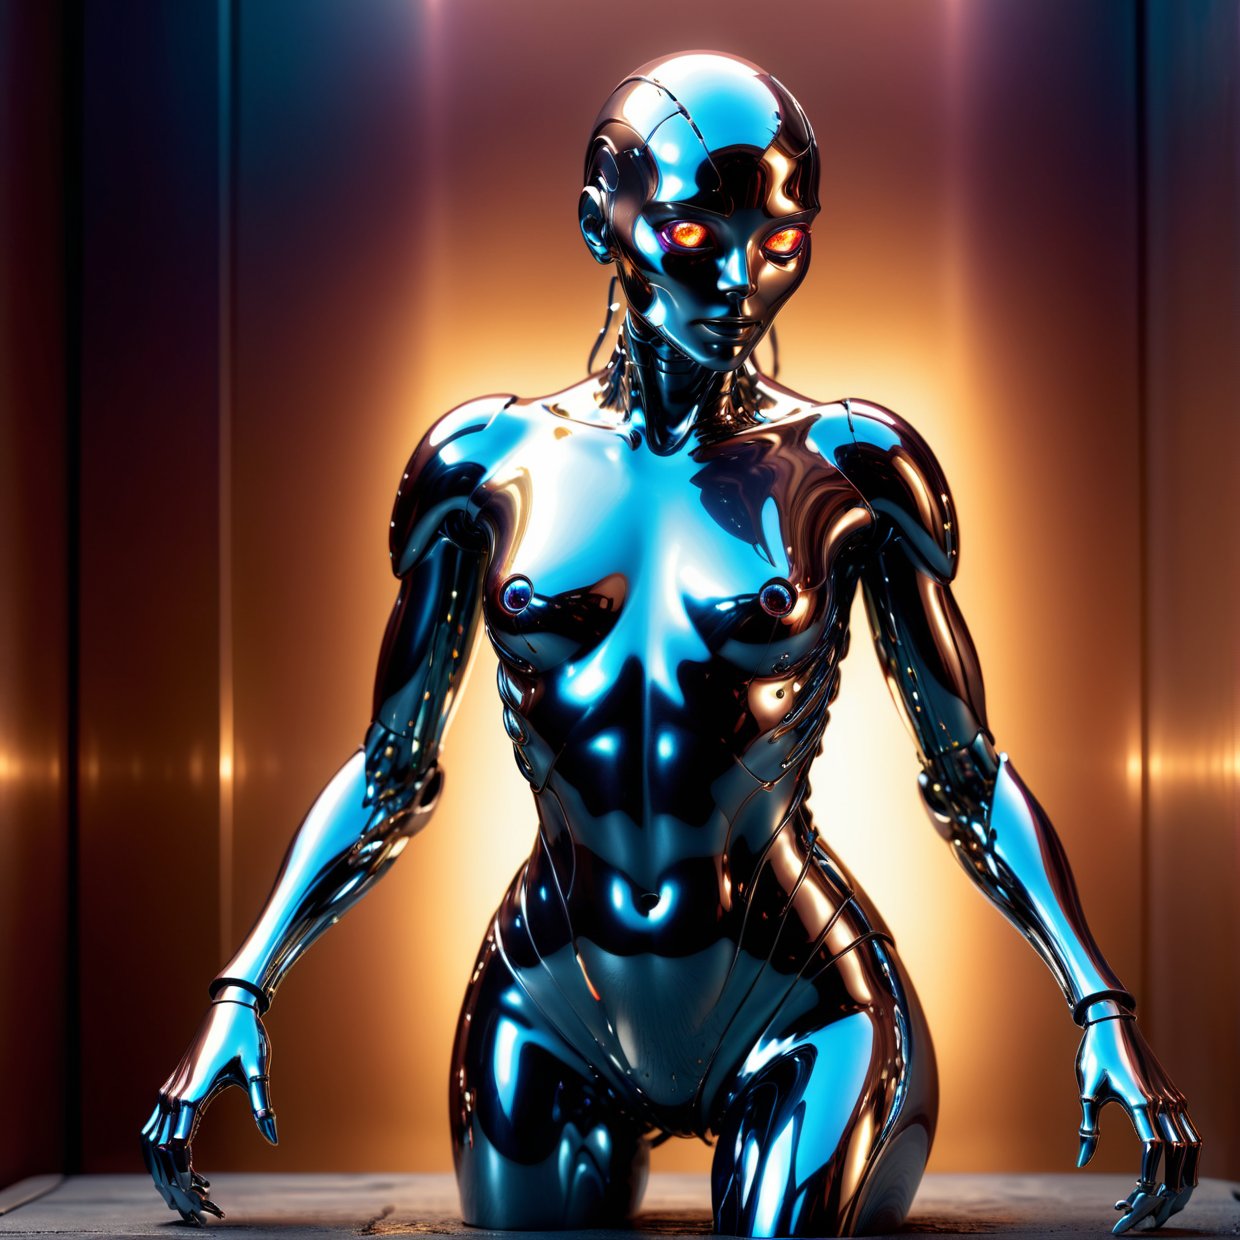 A shiny, metallic humanoid figure, chrome liquid metal body, highly detailed features, glowing eyes, seamless joints, flowing liquid movements, surreal and futuristic atmosphere, cinematic lighting, dramatic shadows, vibrant color palette, photorealistic rendering, digital art, concept art